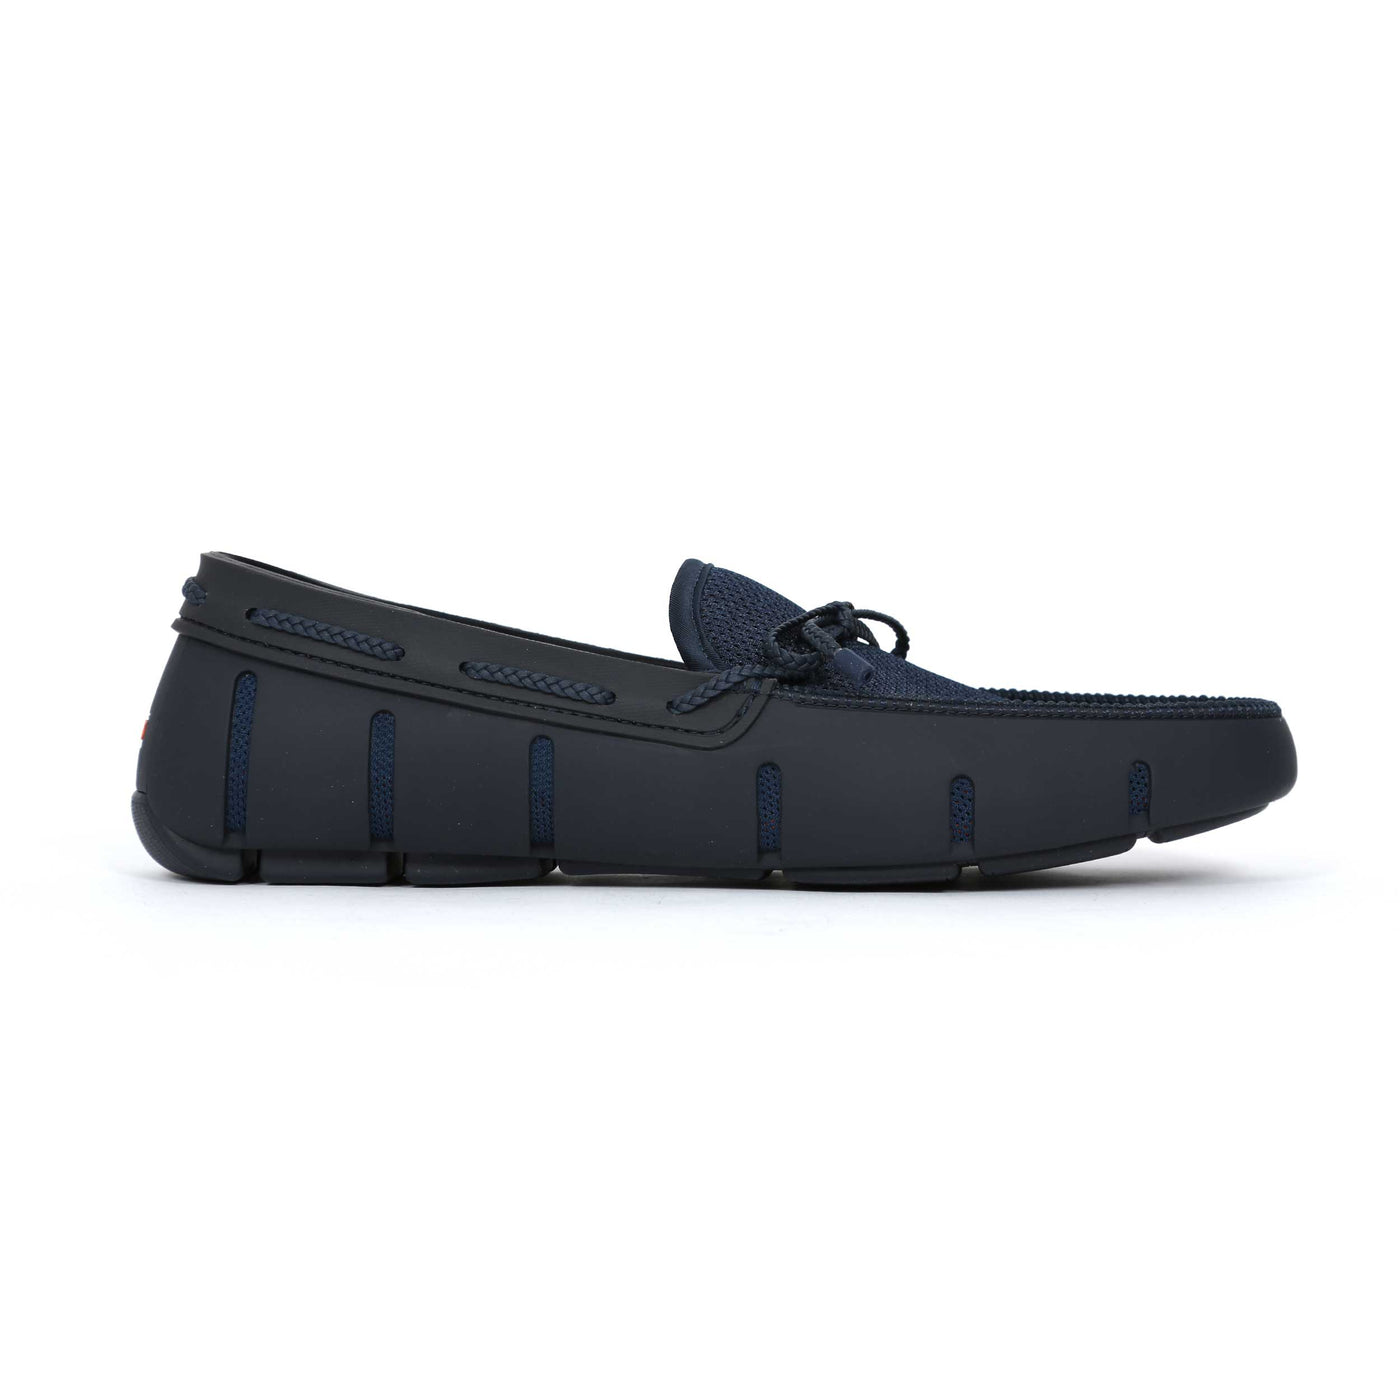 Swims Braided Lace Loafer Shoe in Navy